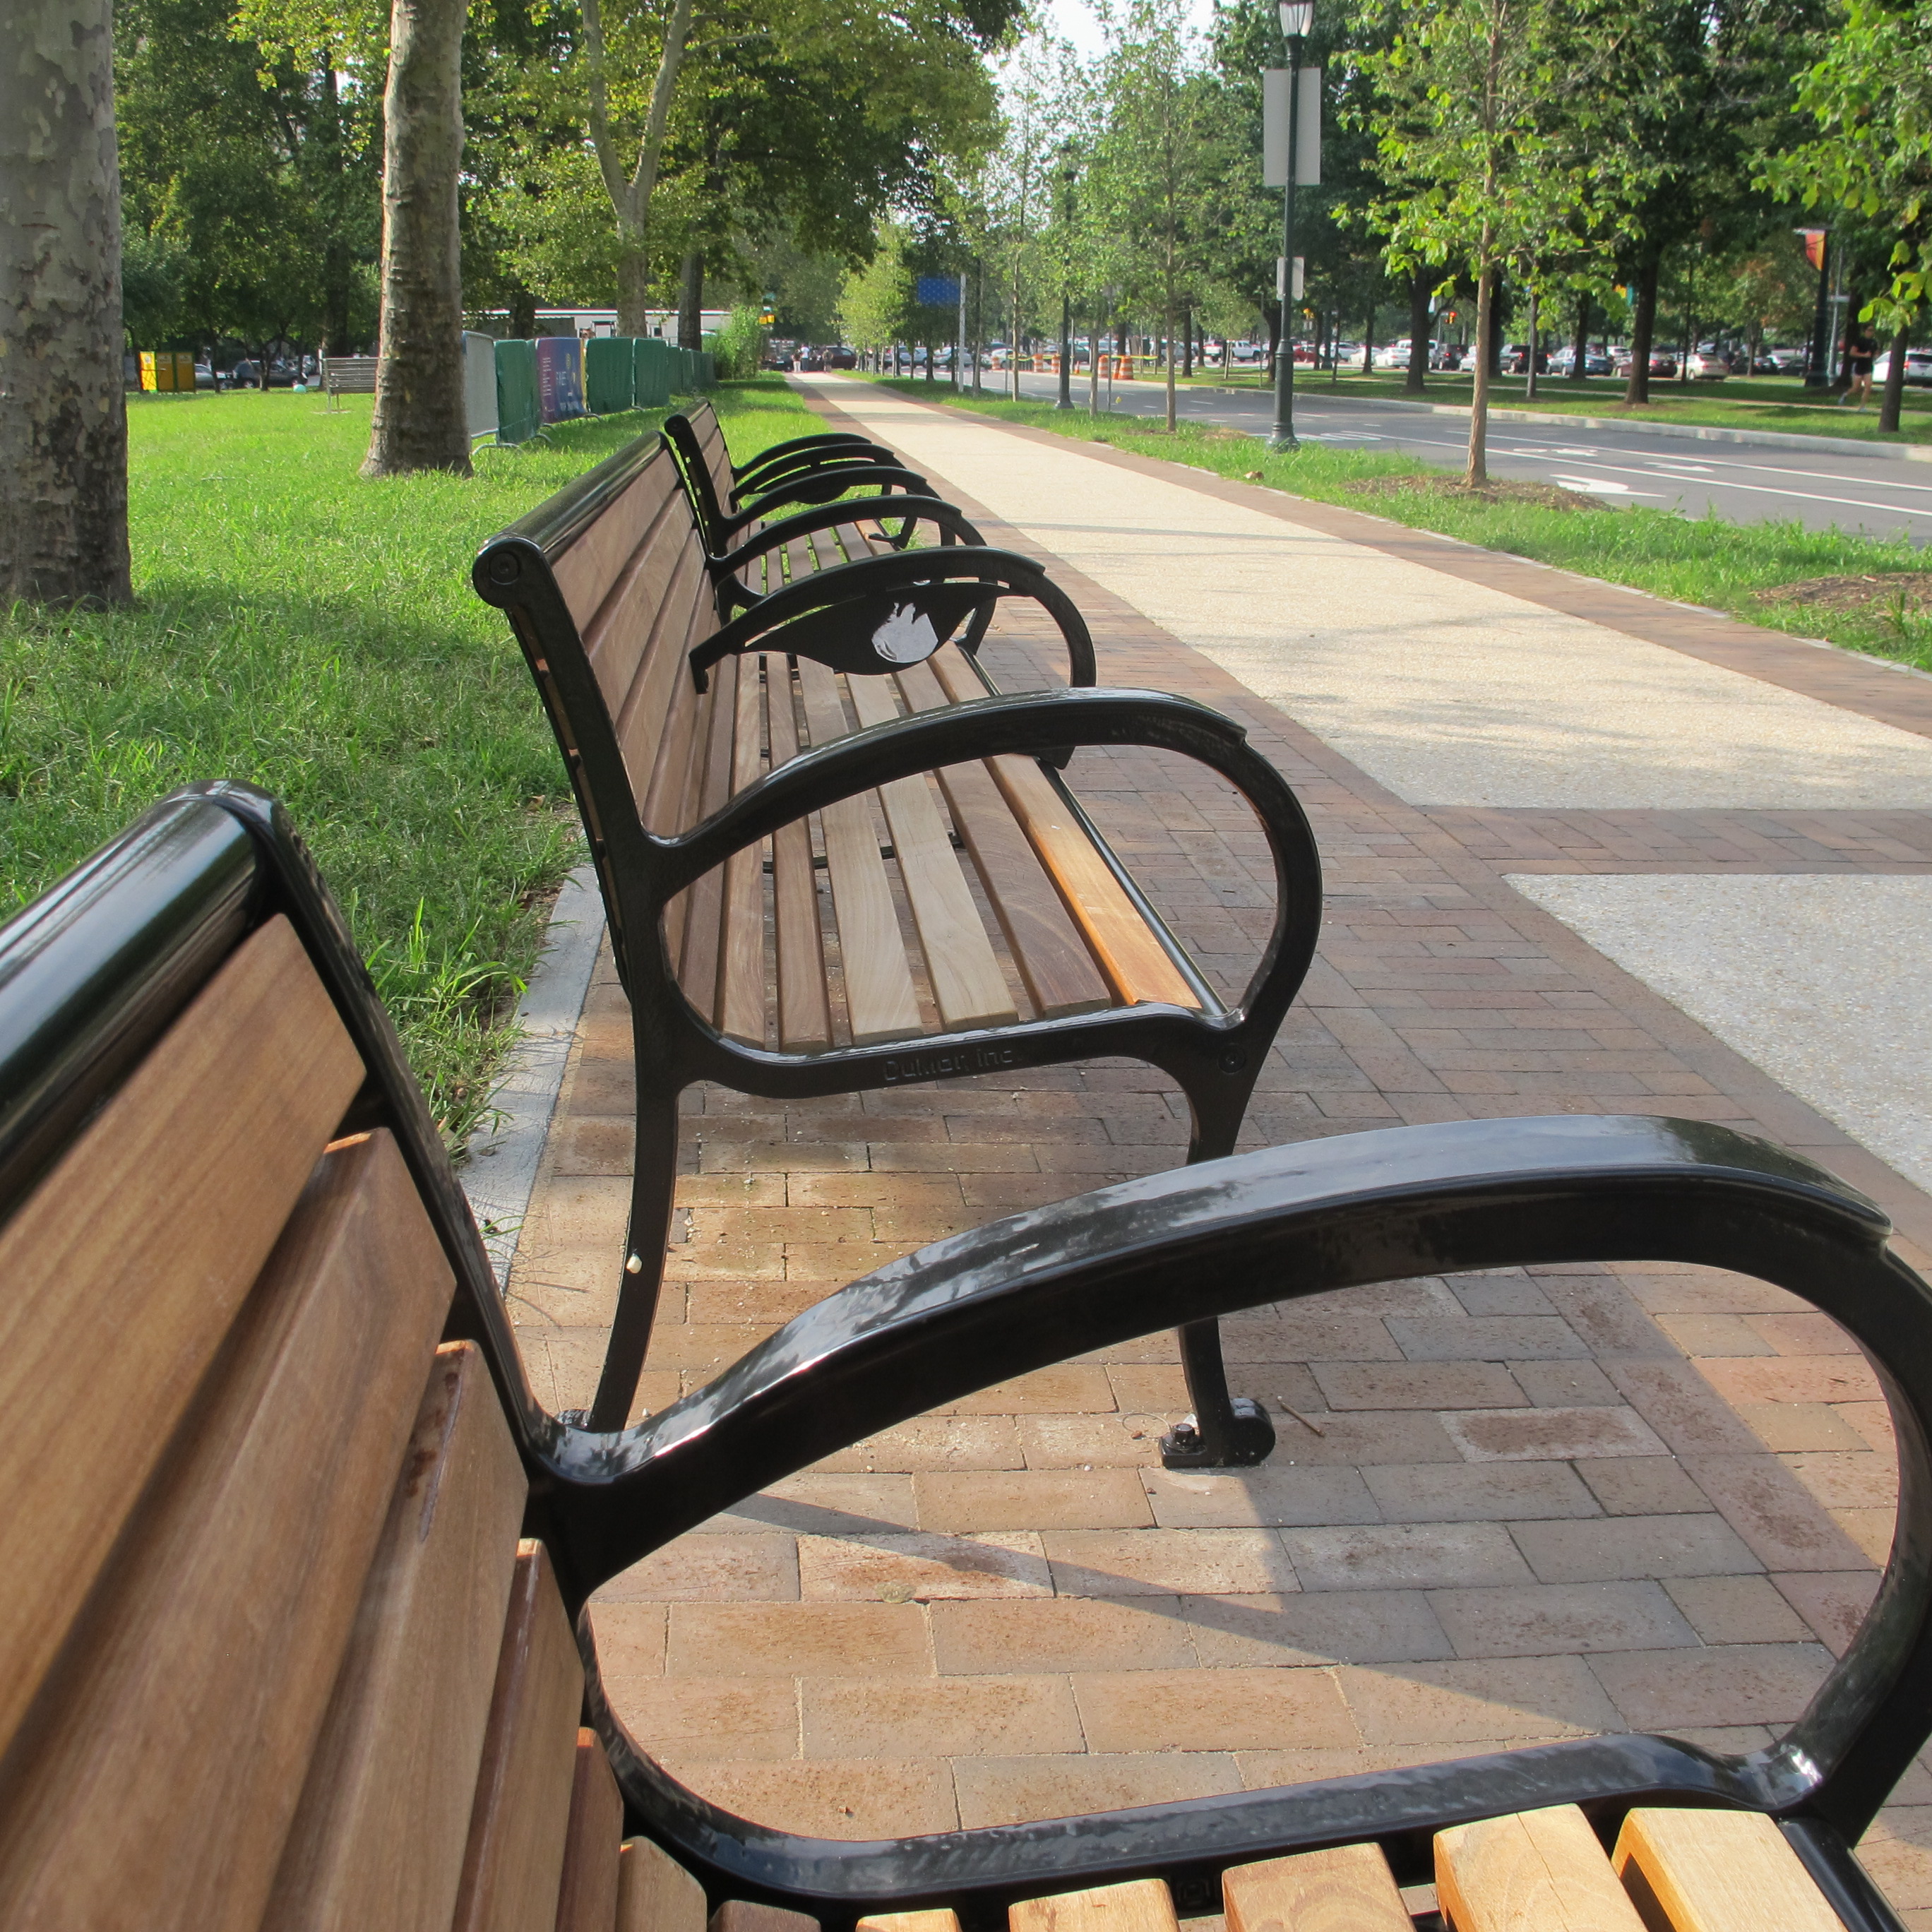 New benches and sidewalks installed on the Parkway, August 2011.